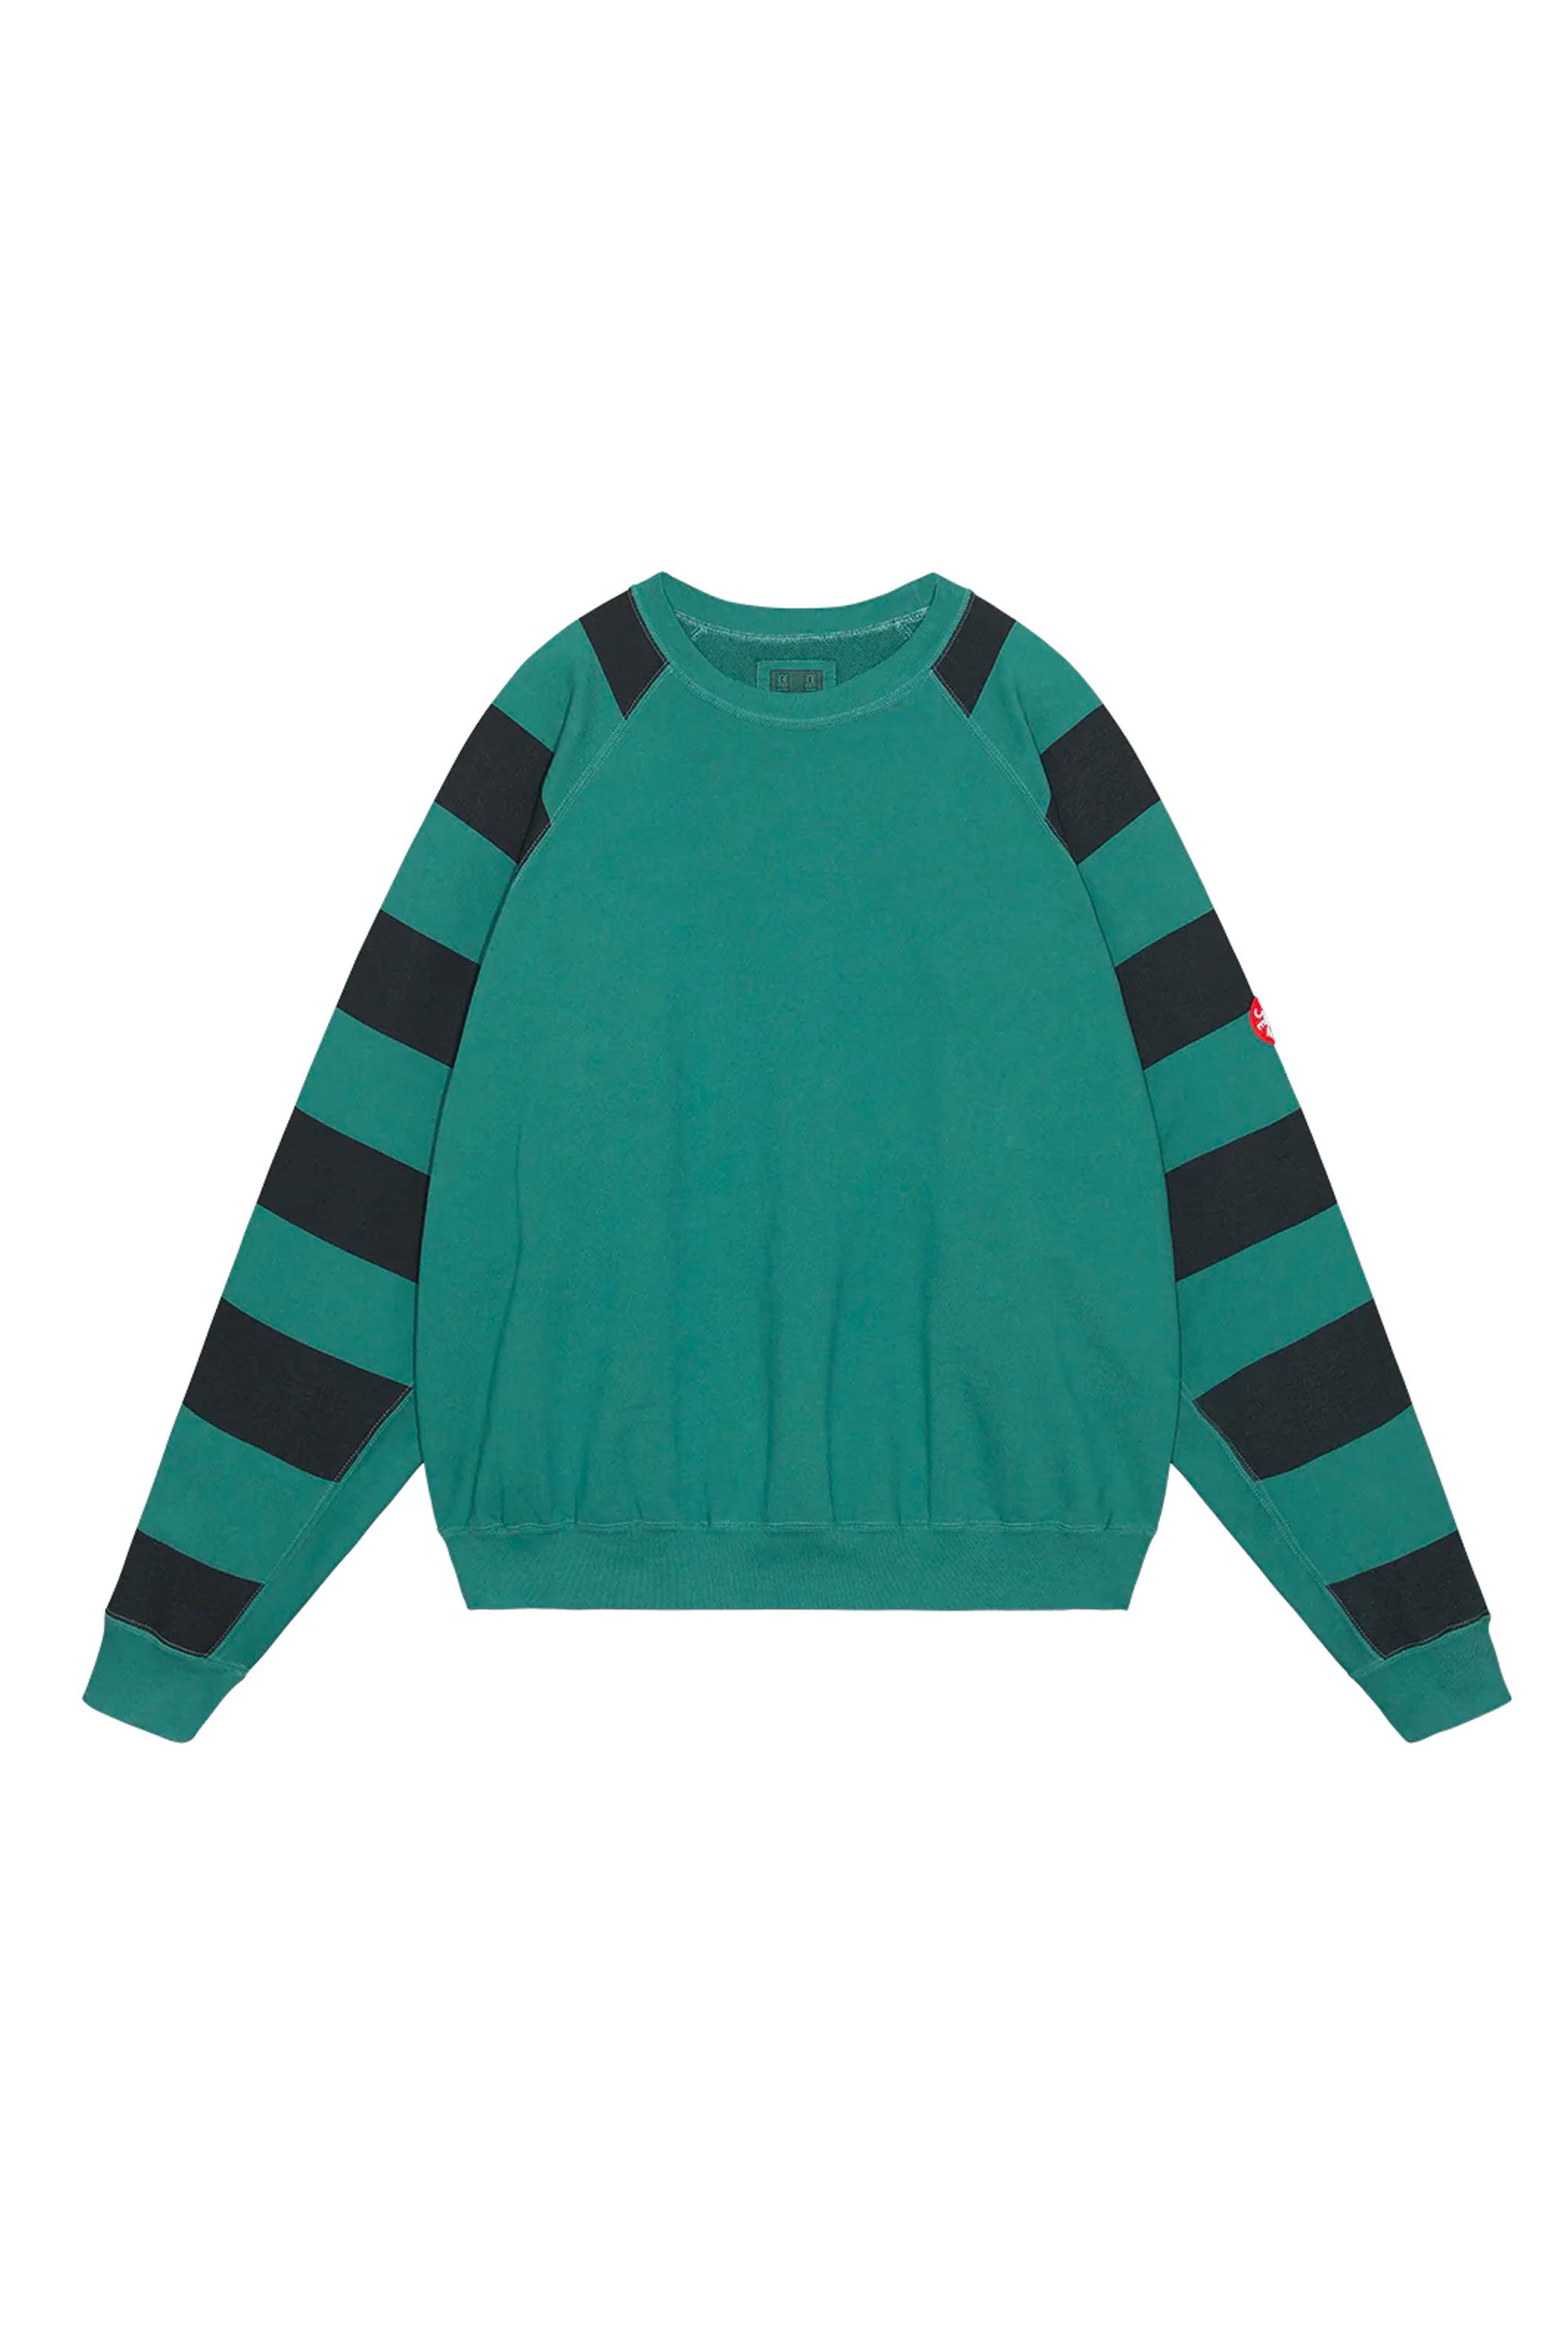 The CAV EMPT - OVERDYE STRIPE SLEEVE BIG CREW NECK GREEN available online with global shipping, and in PAM Stores Melbourne and Sydney.